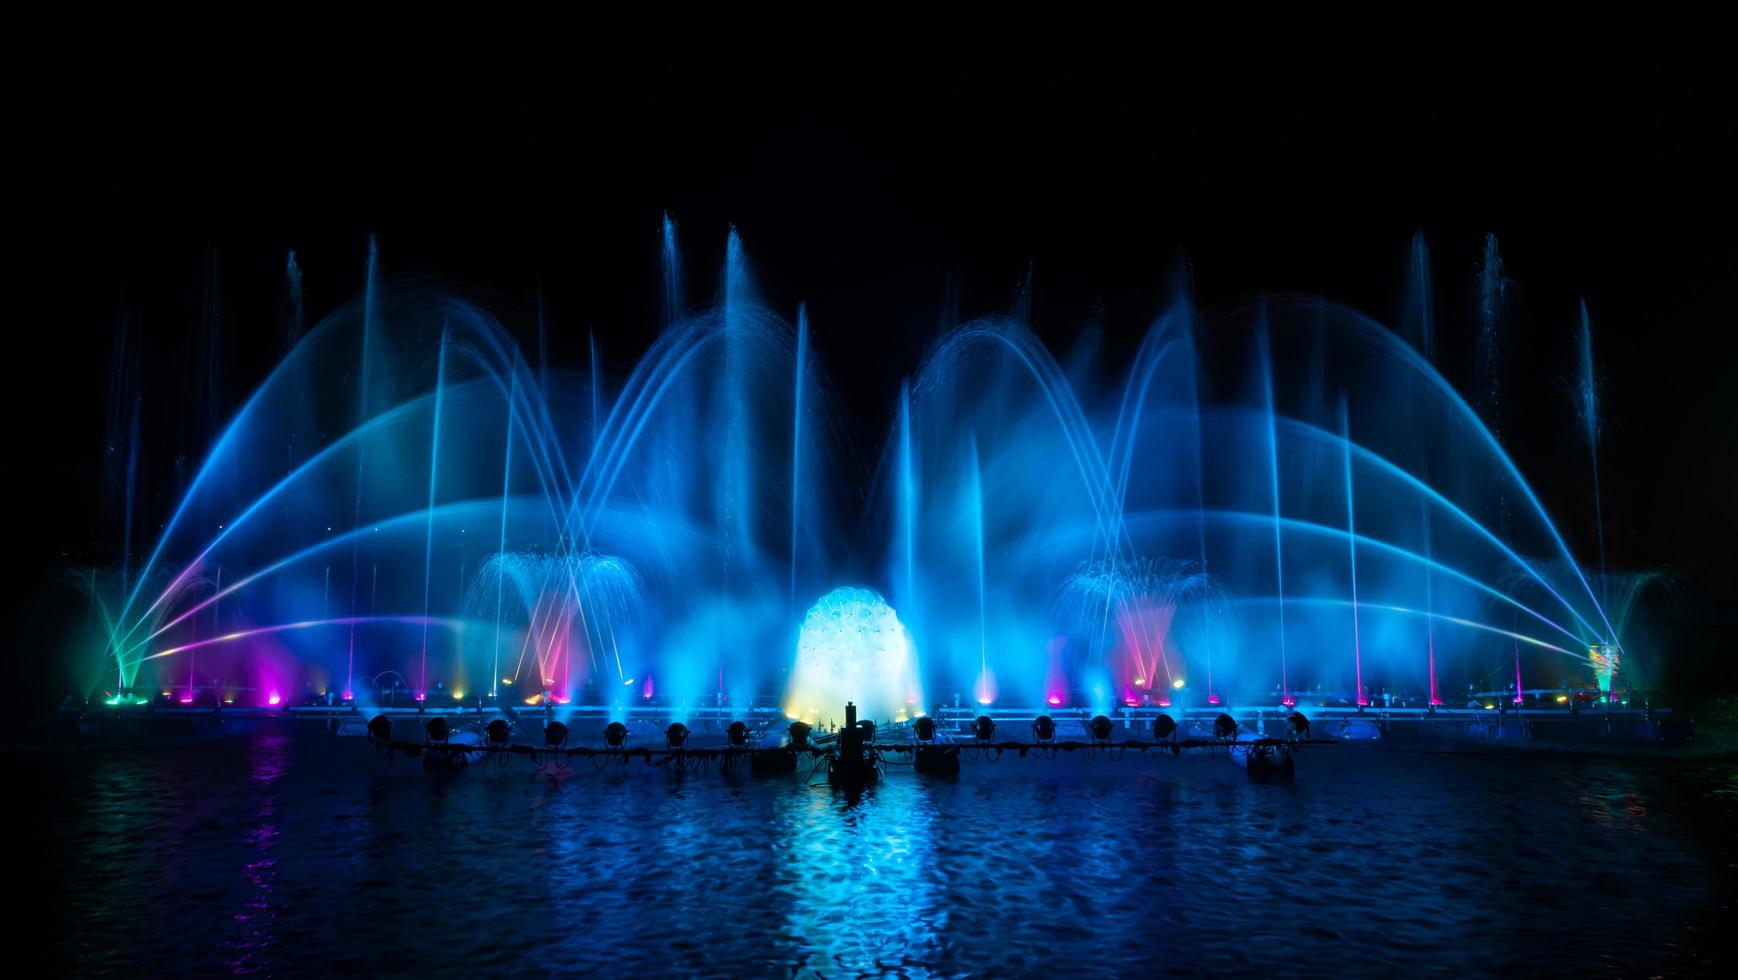 The colorful fountain dancing in celebration of year with dark night sky background. photo